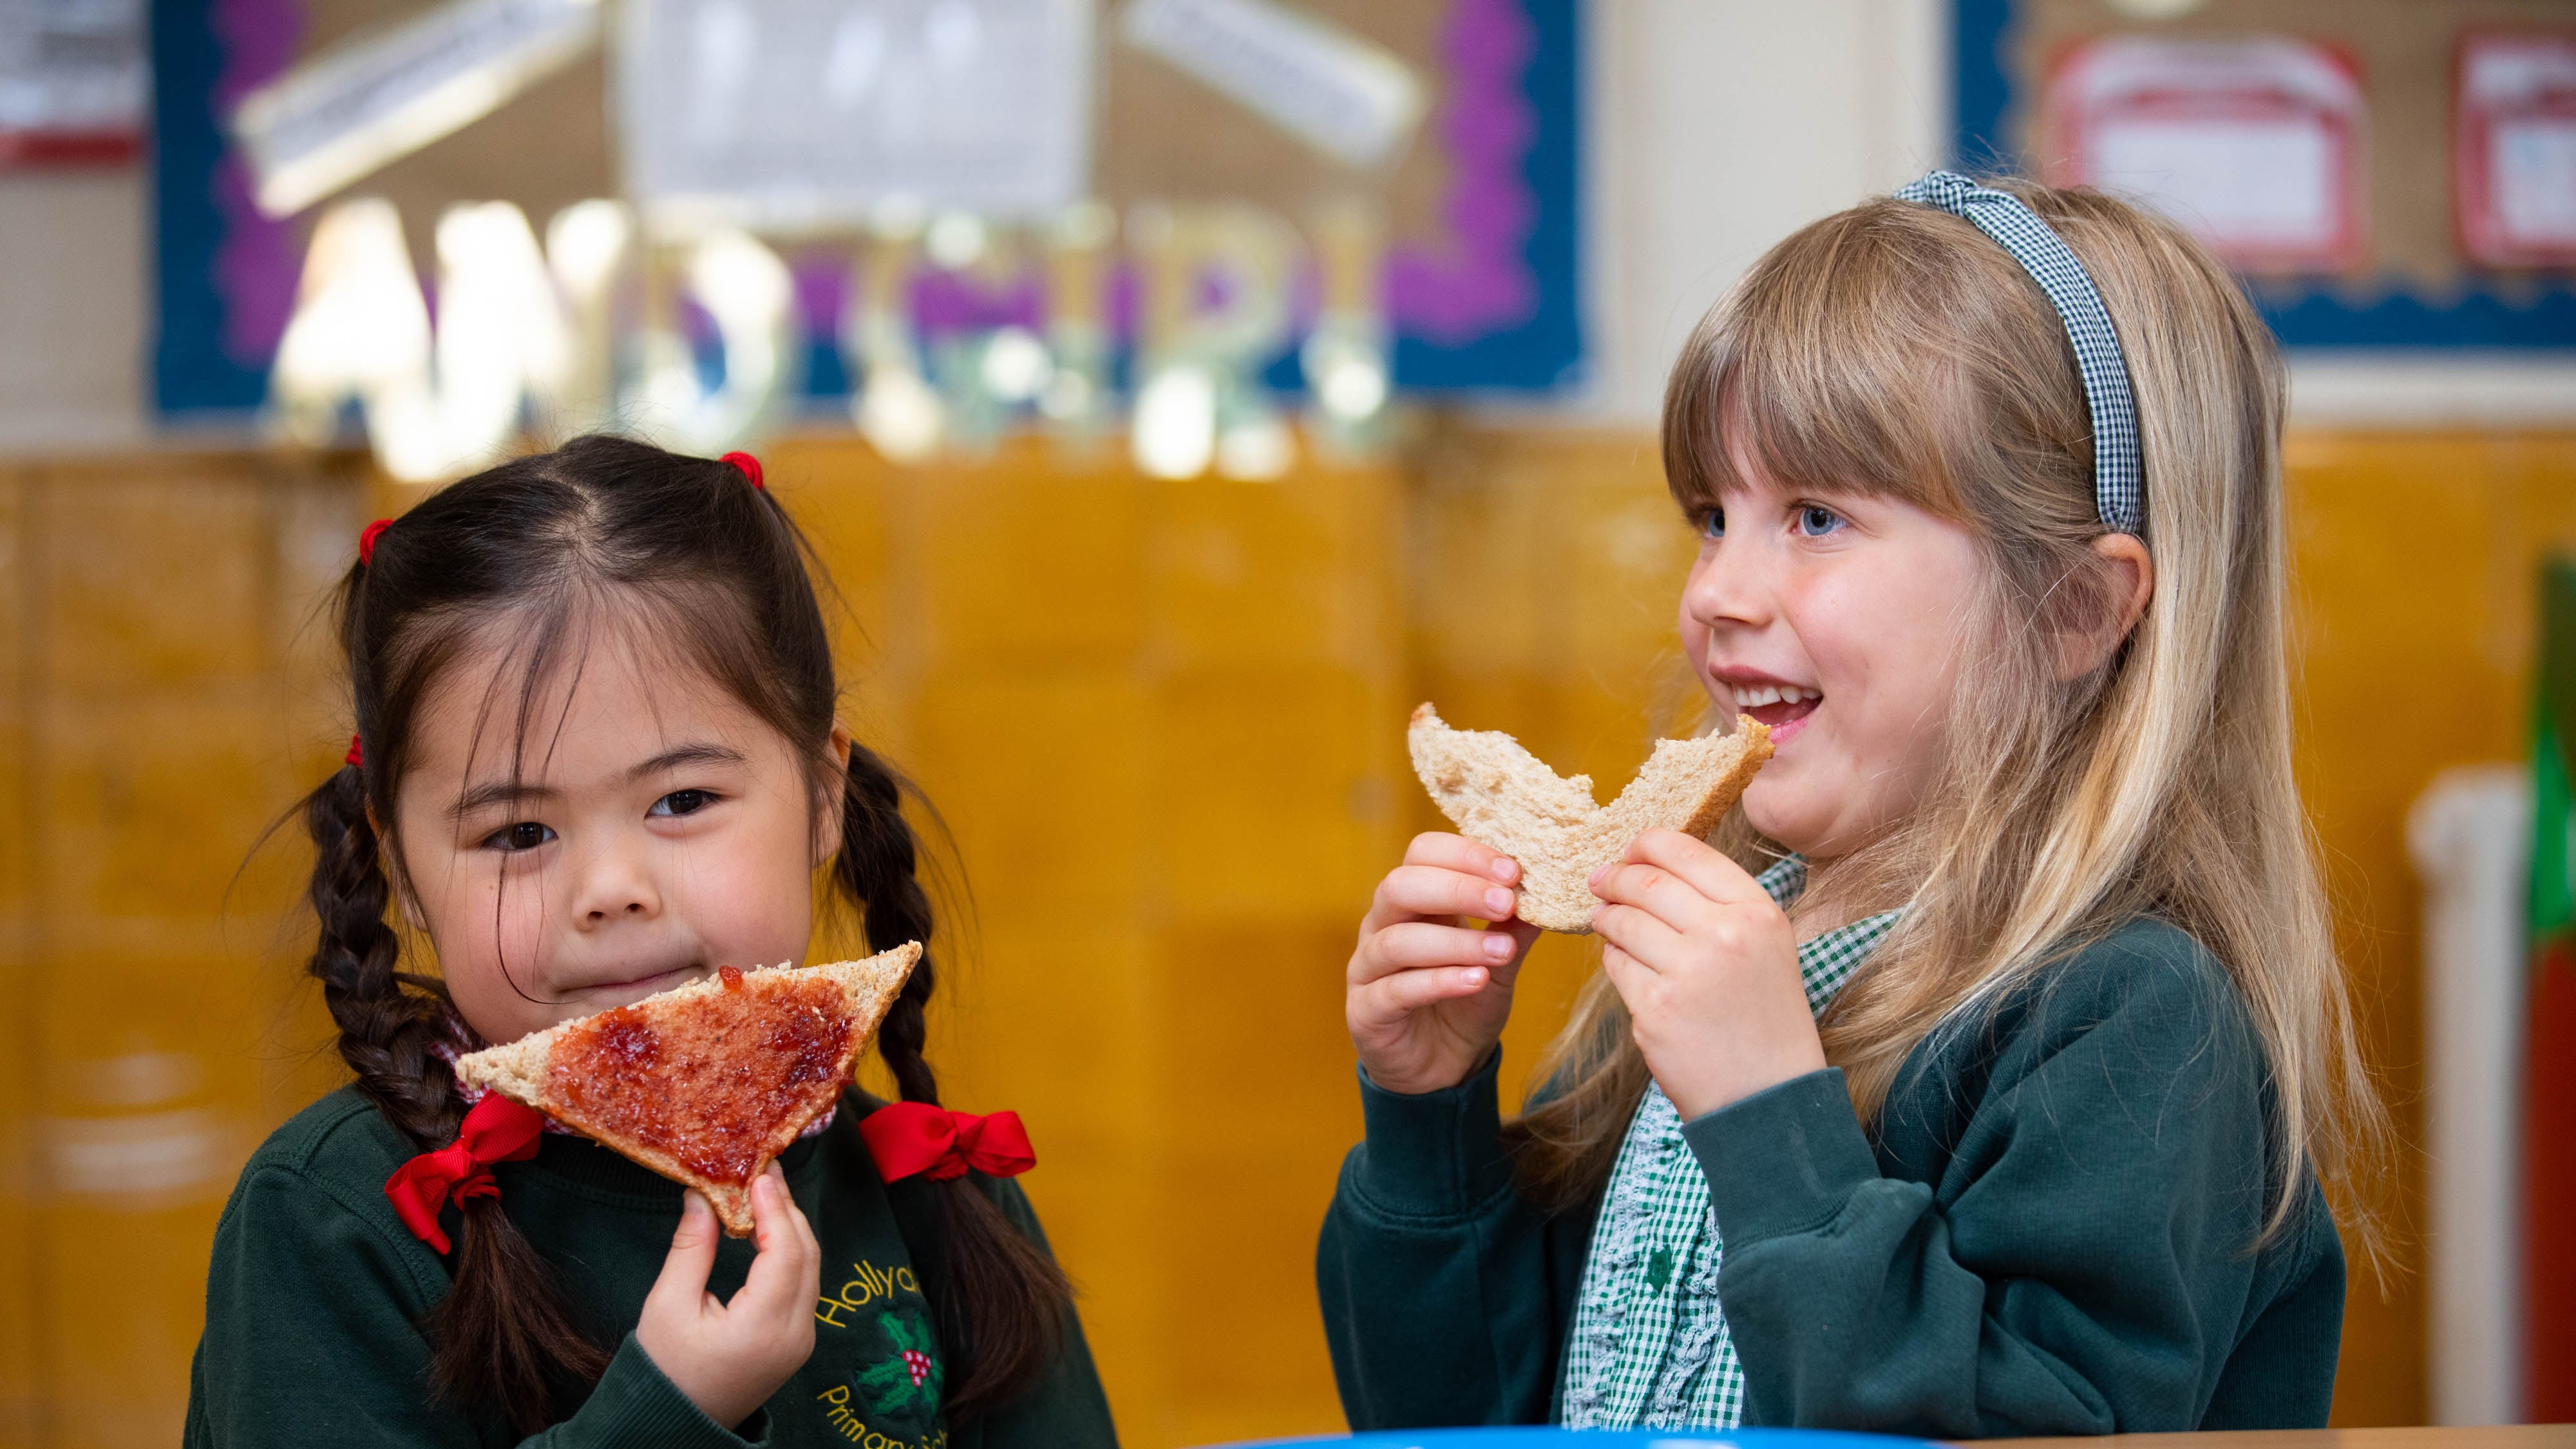 Labour have said their commitment to delivering free breakfast clubs in primary schools will save parents more than £400 a year and cut almost half a million days of school absence